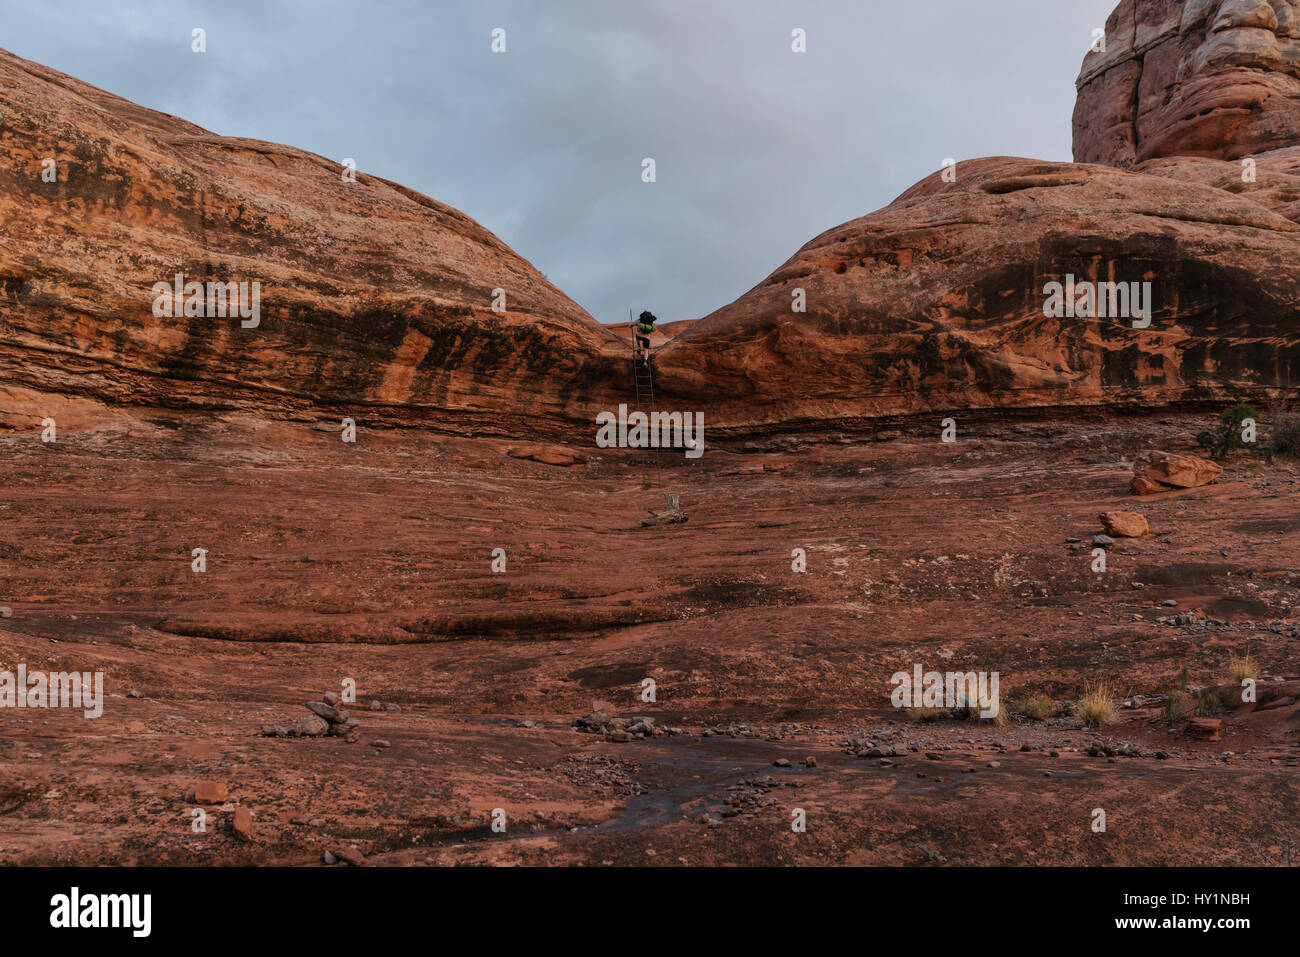 Hiking through the remote Canyonlands in Utah. Stock Photo